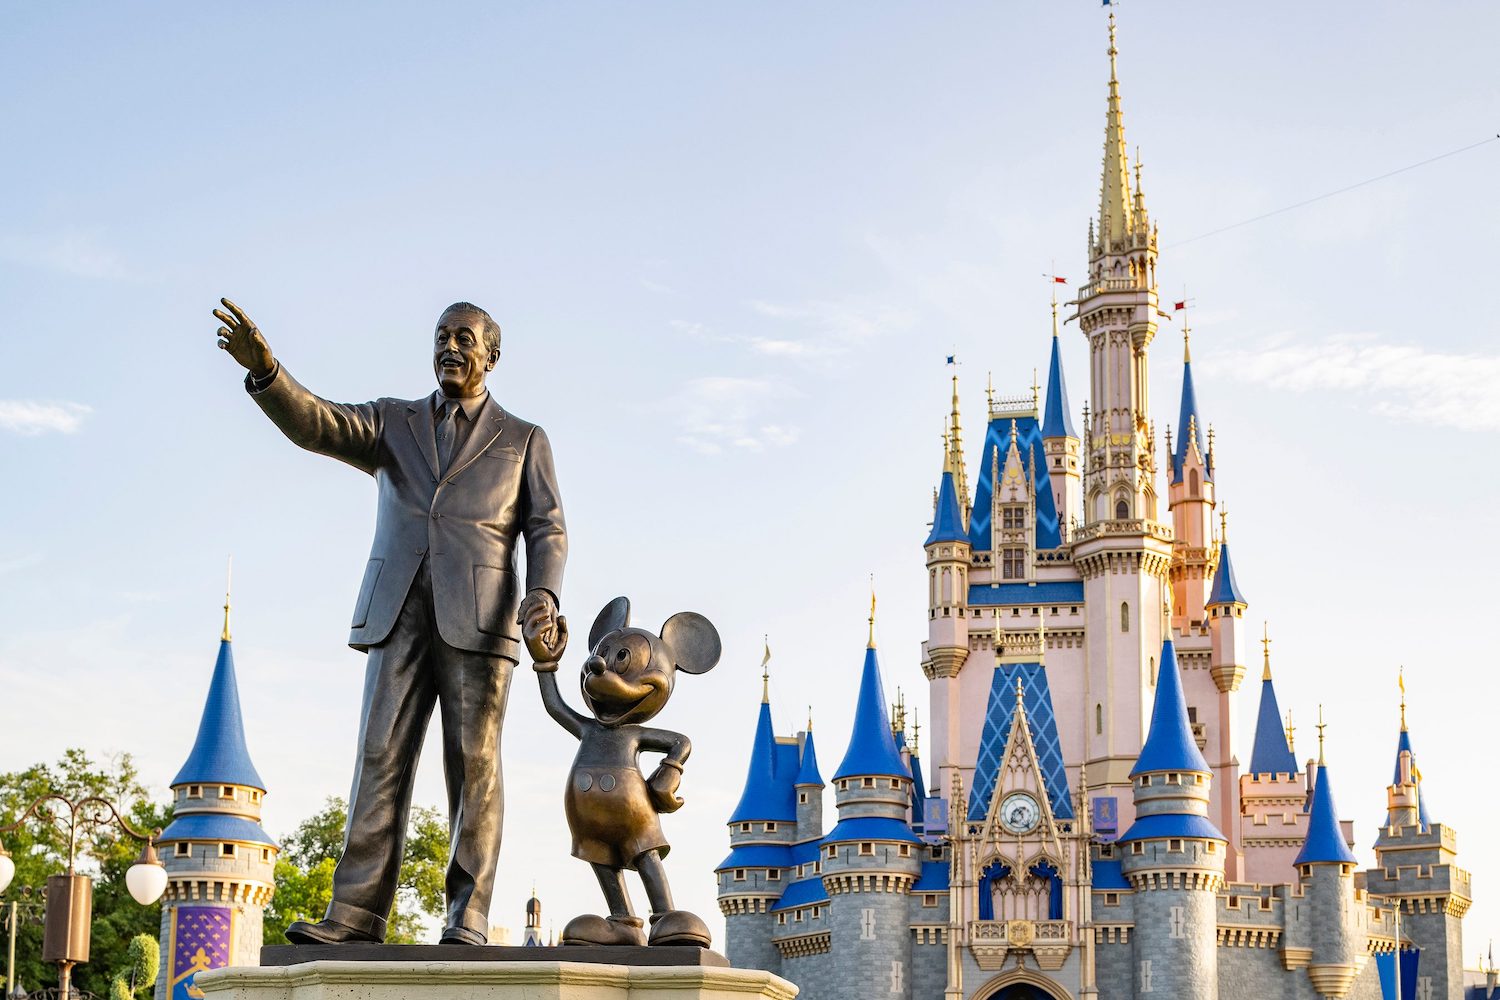 What is There to Do at Each Walt Disney World Park?